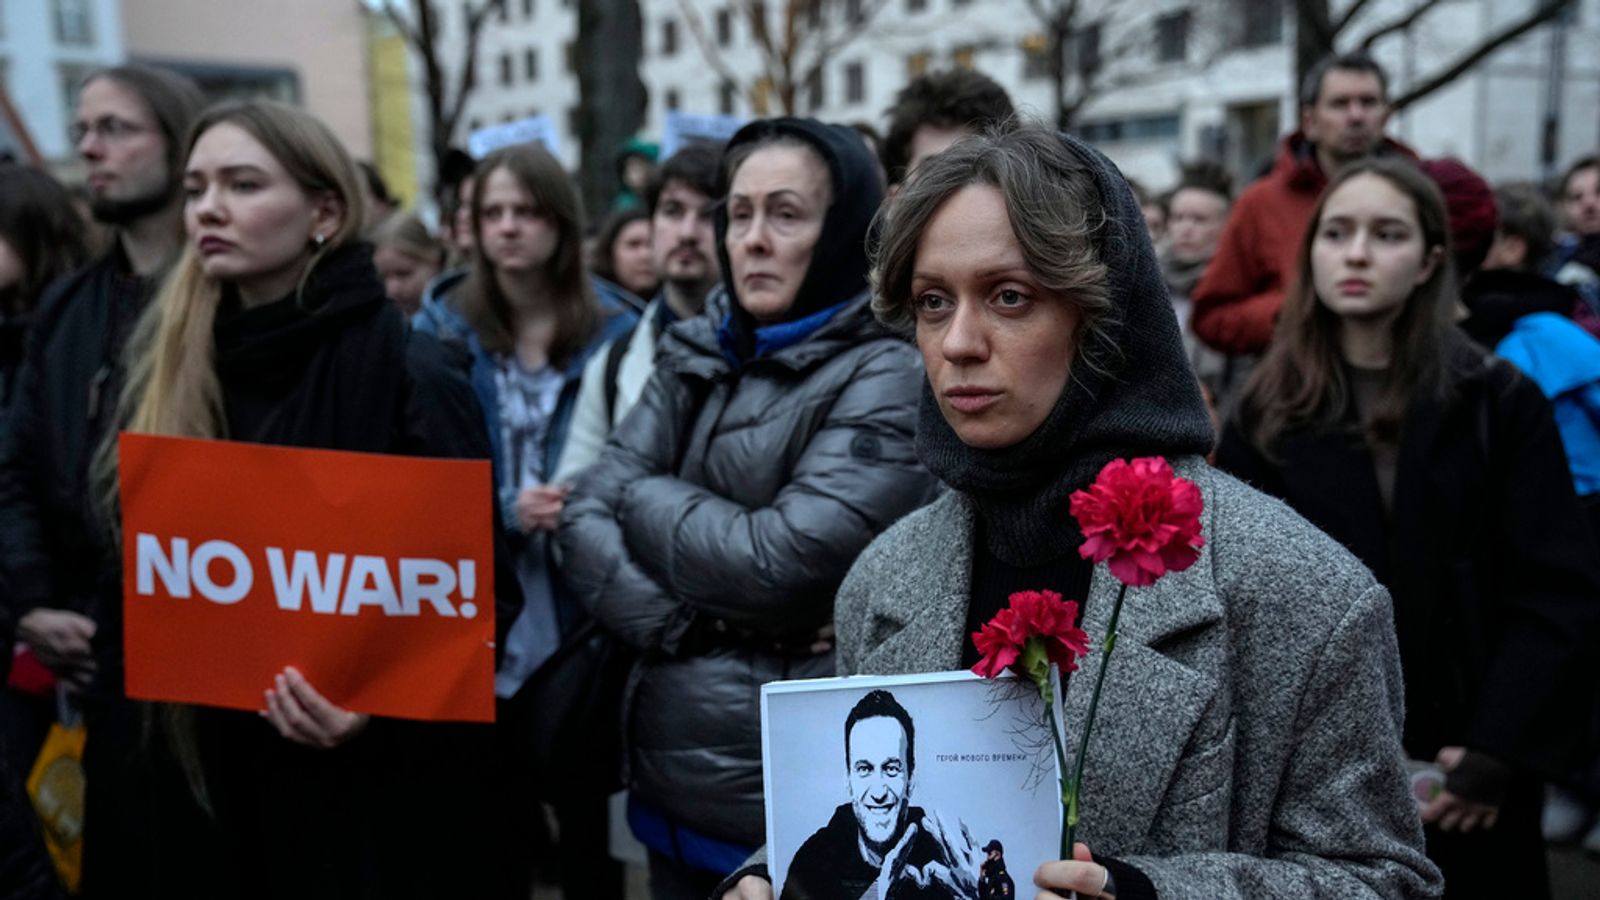 police in russia crack down on navalny protests as human rights group claims 'at least 100 arrested'